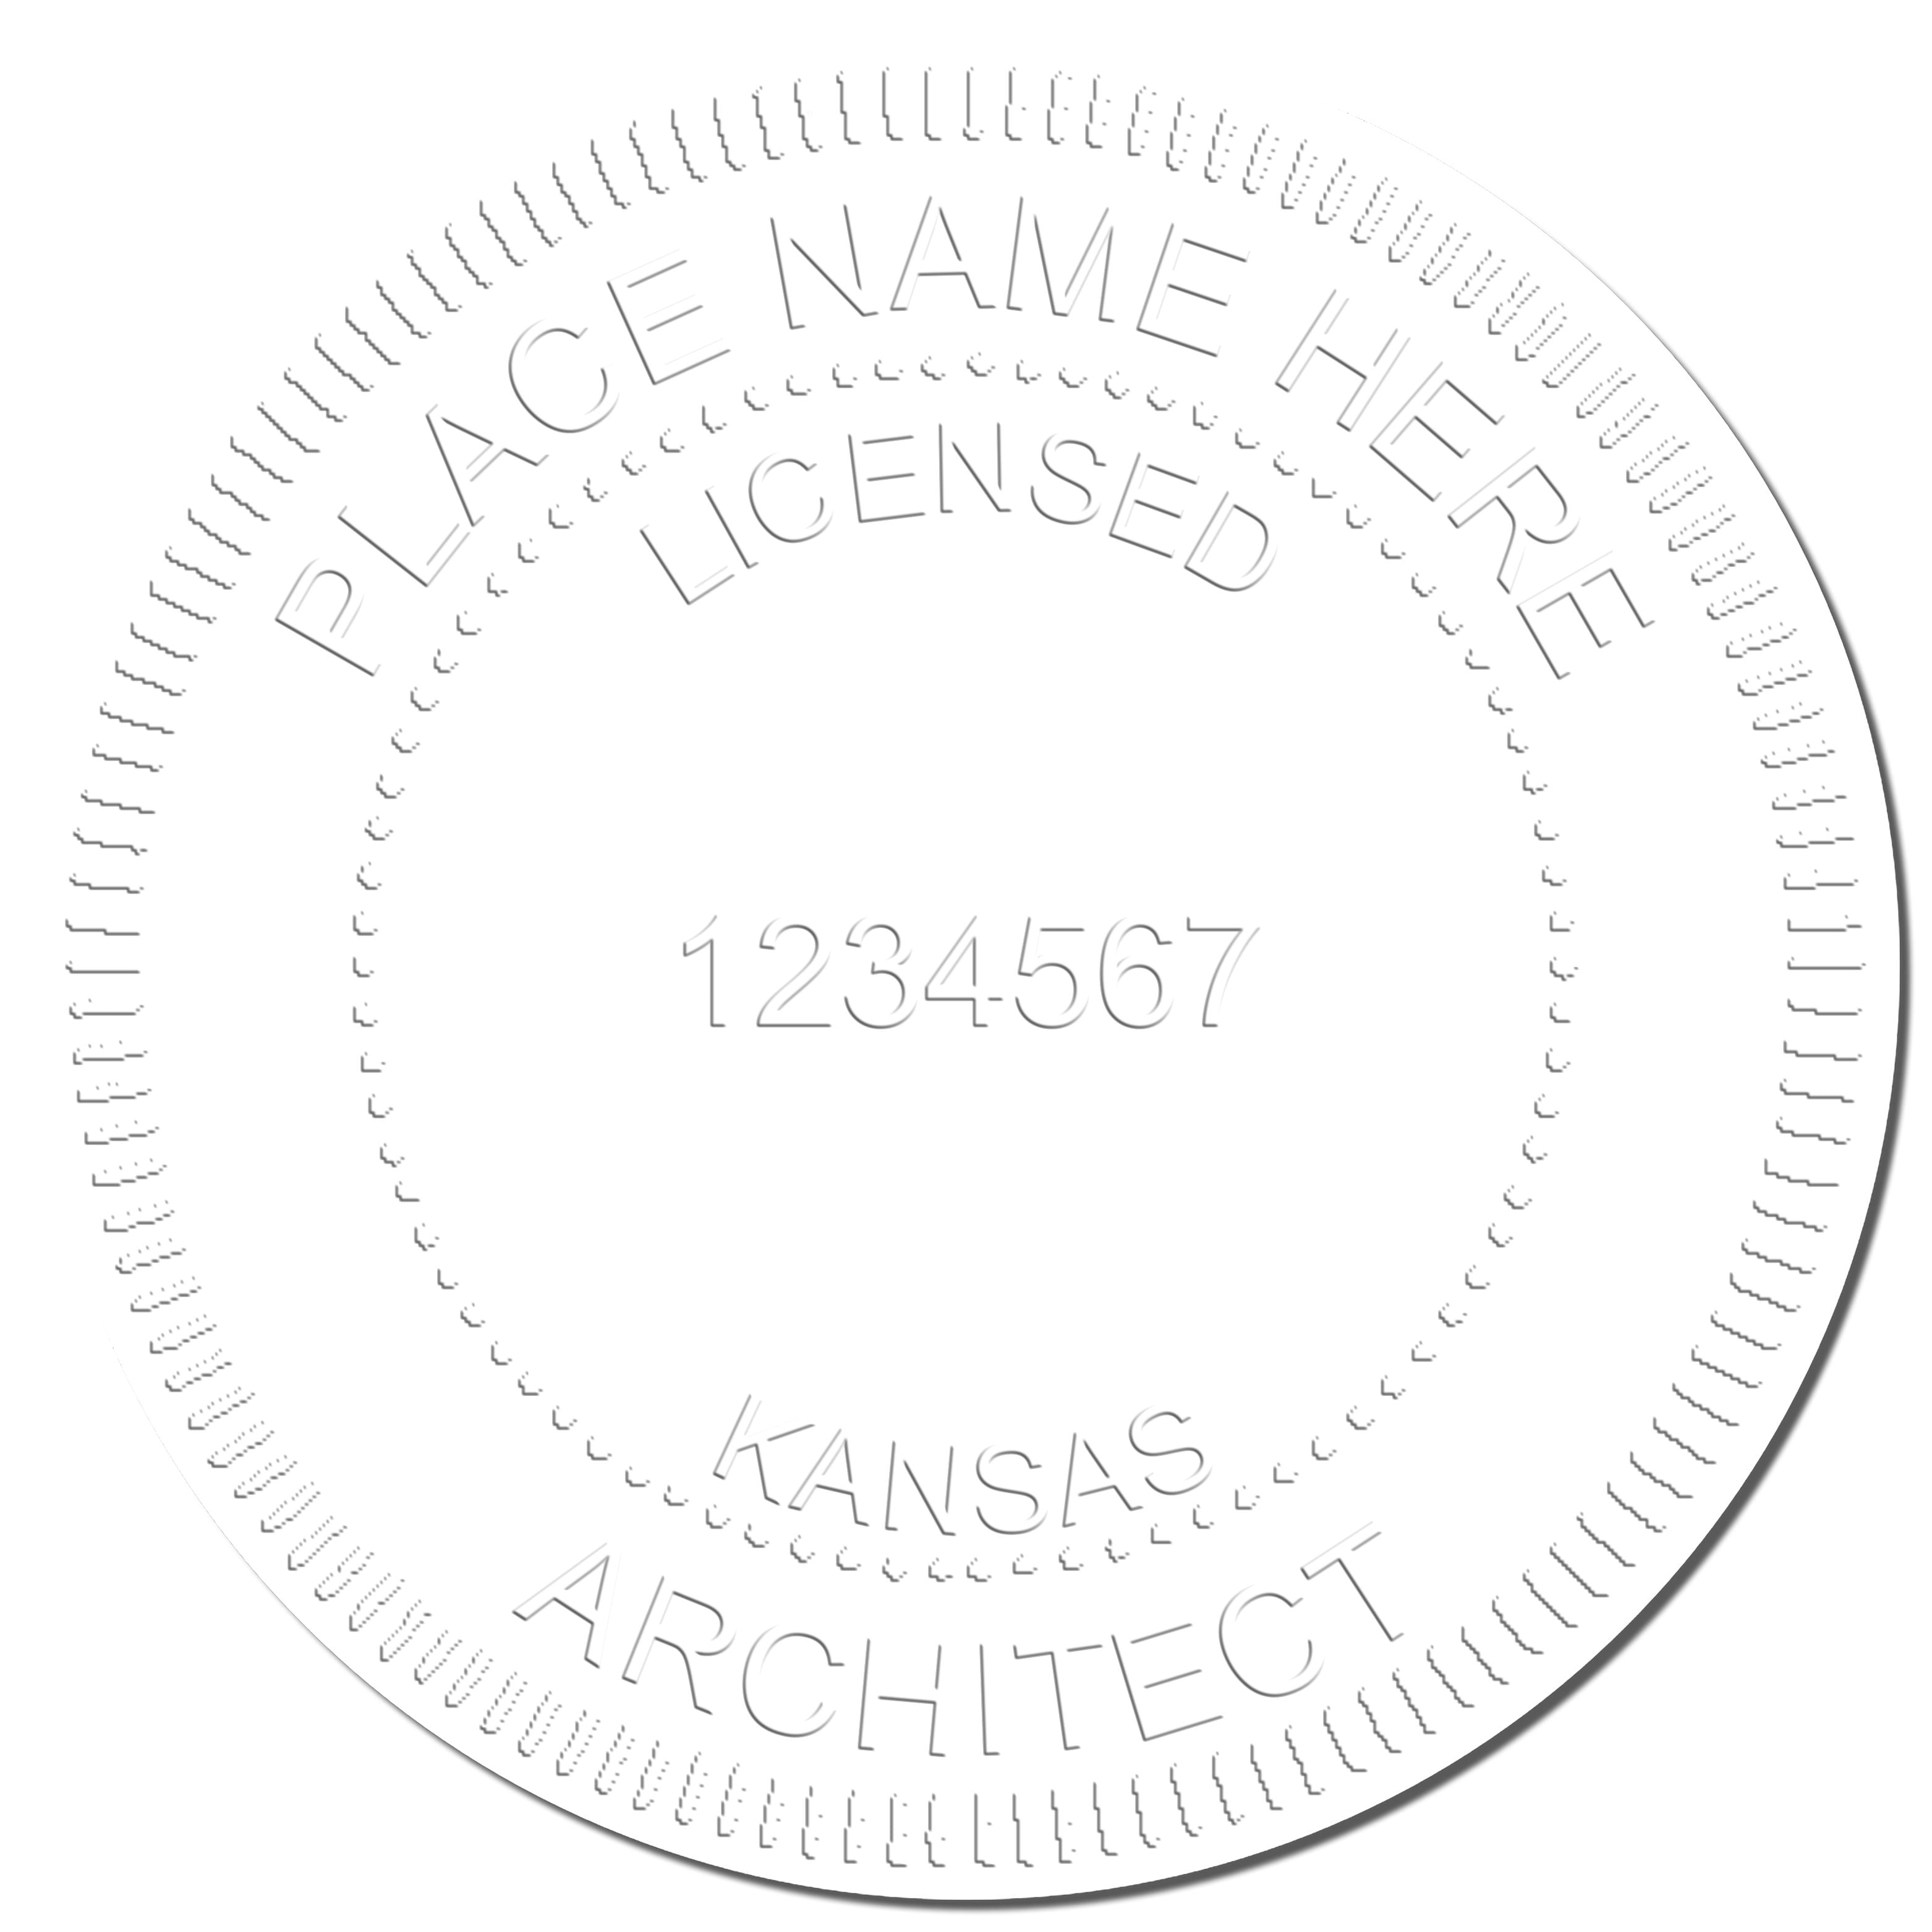 A stamped impression of the State of Kansas Long Reach Architectural Embossing Seal in this stylish lifestyle photo, setting the tone for a unique and personalized product.